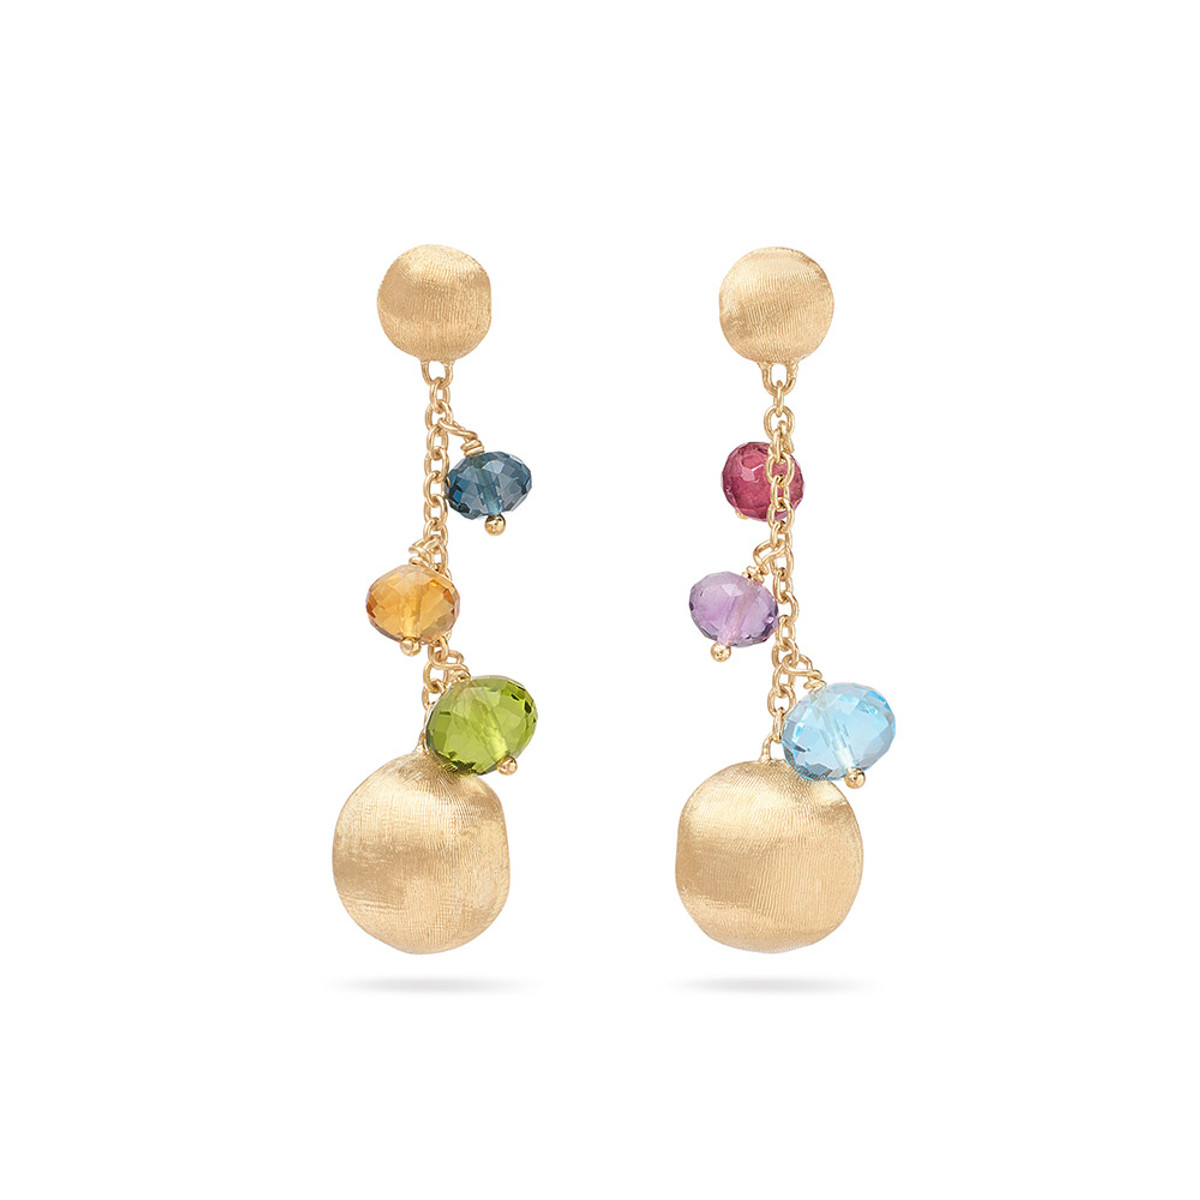 Marco Bicego Africa Collection 18K Yellow Gold Gemstone Drop Earrings-61187 Product Image